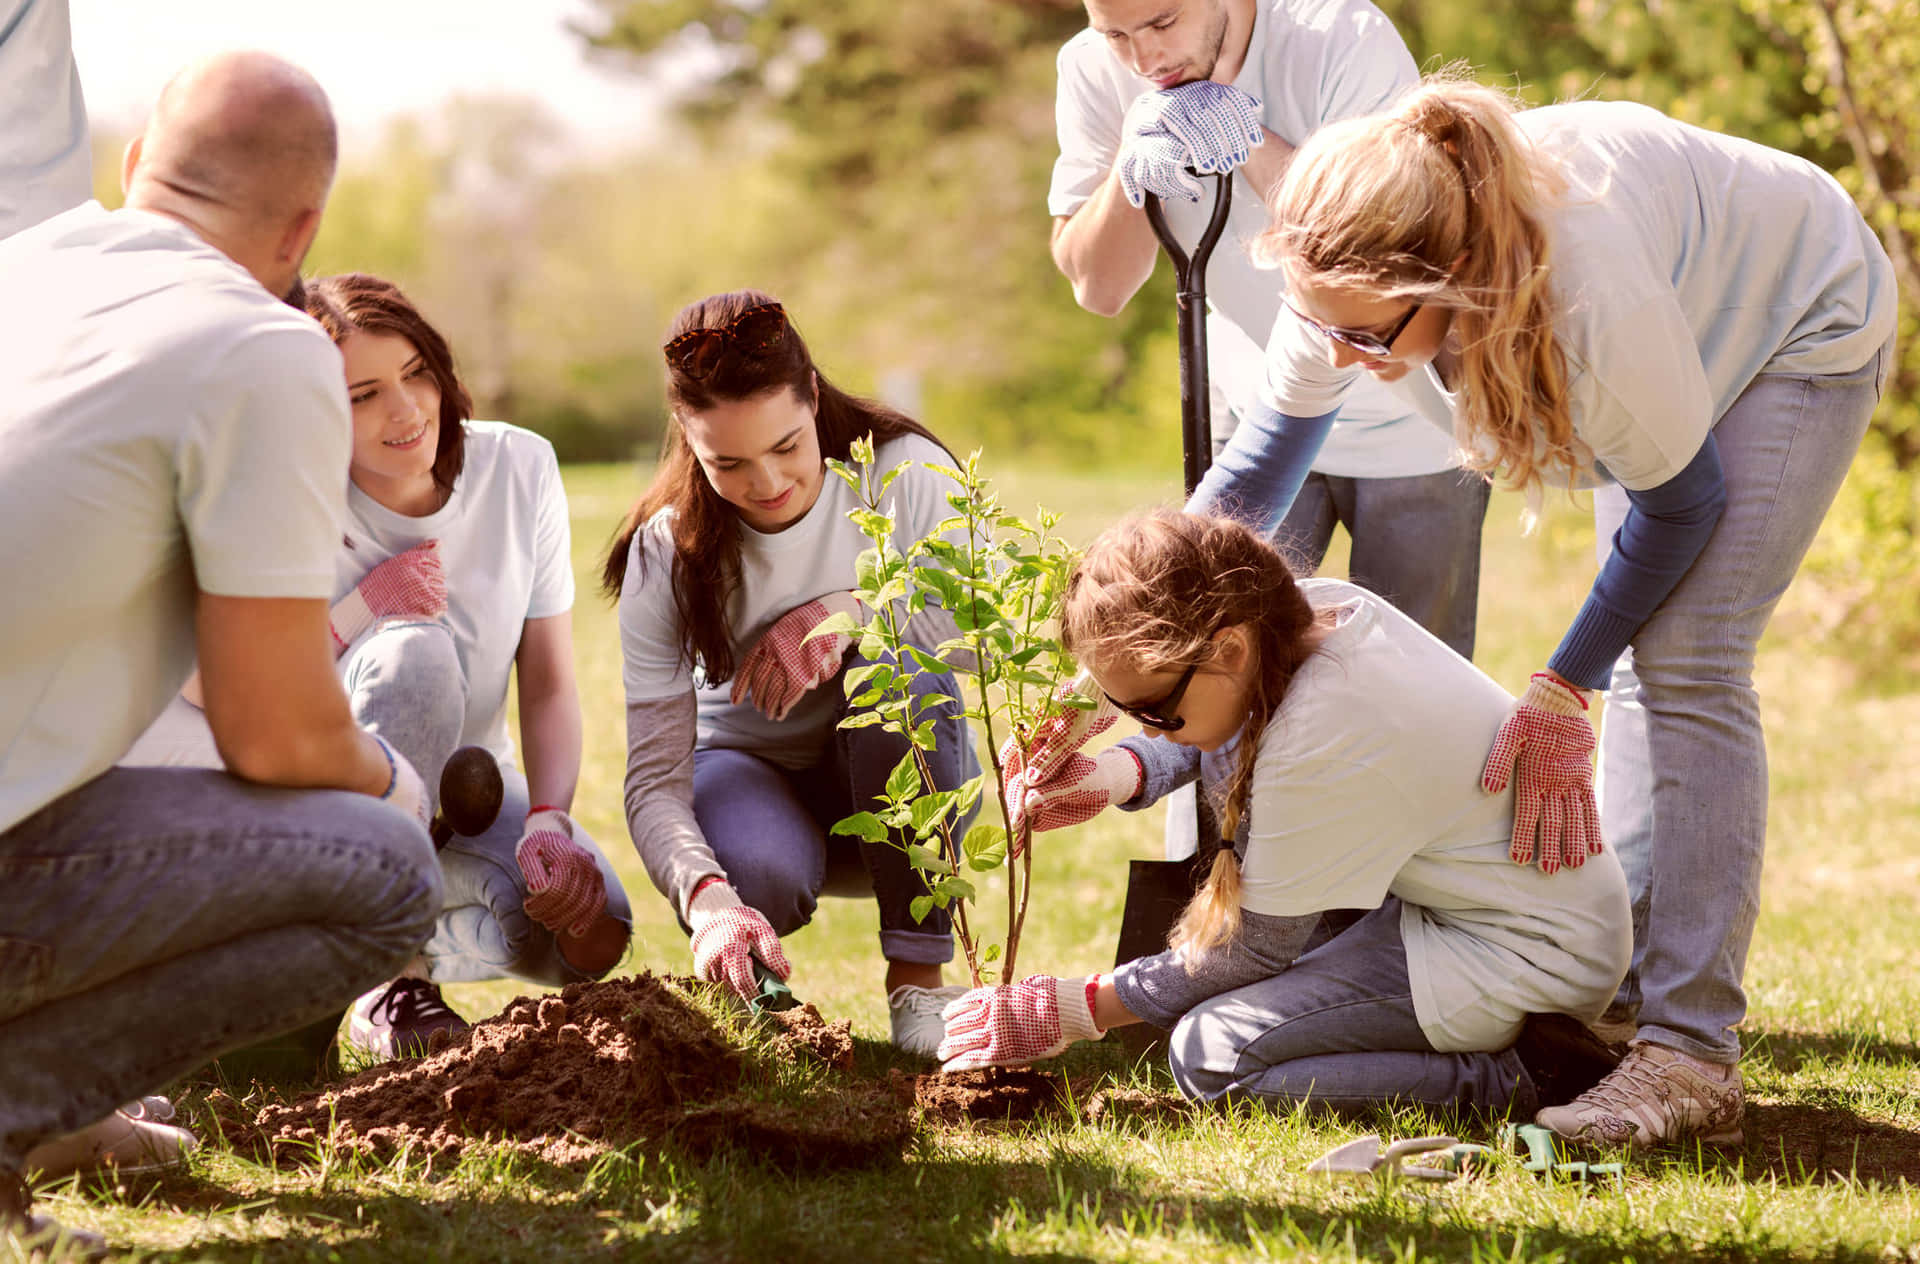 A Group Of People Planting A Tree In A Park